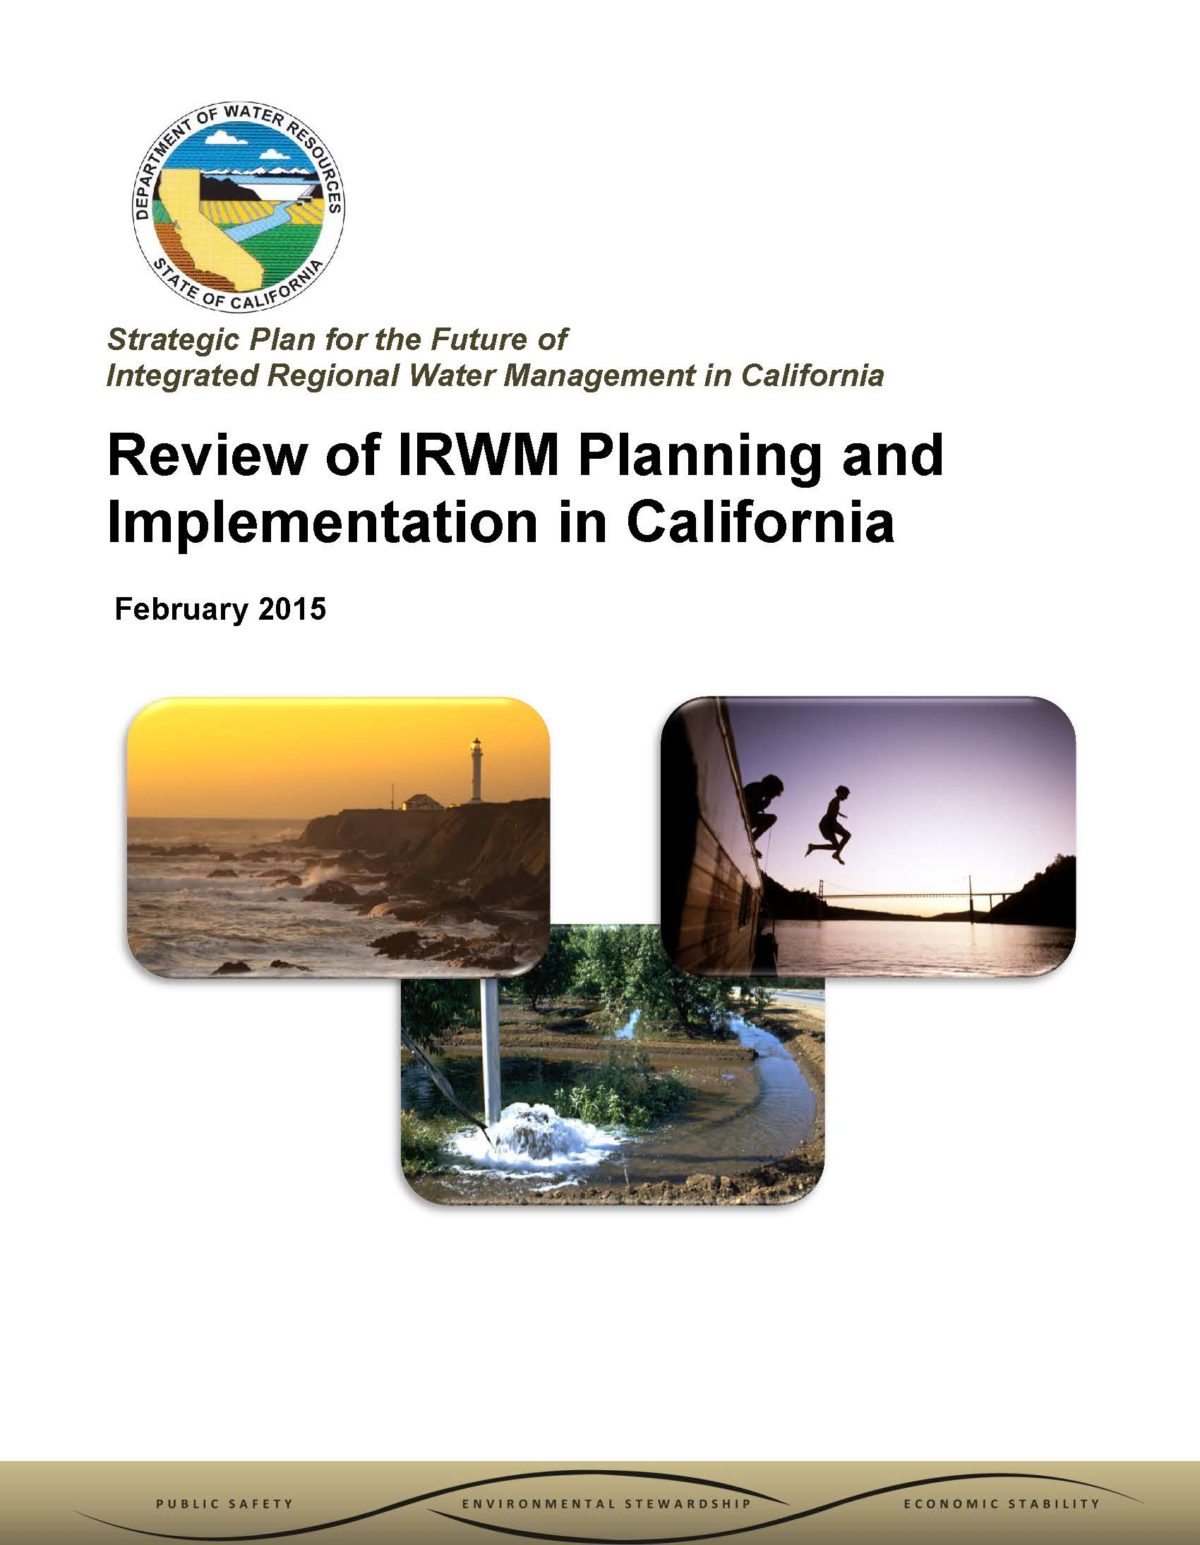 Strategic Plan for the Future of Integrated Regional Water Management in California: Review of IRWM Planning and Implementation in California